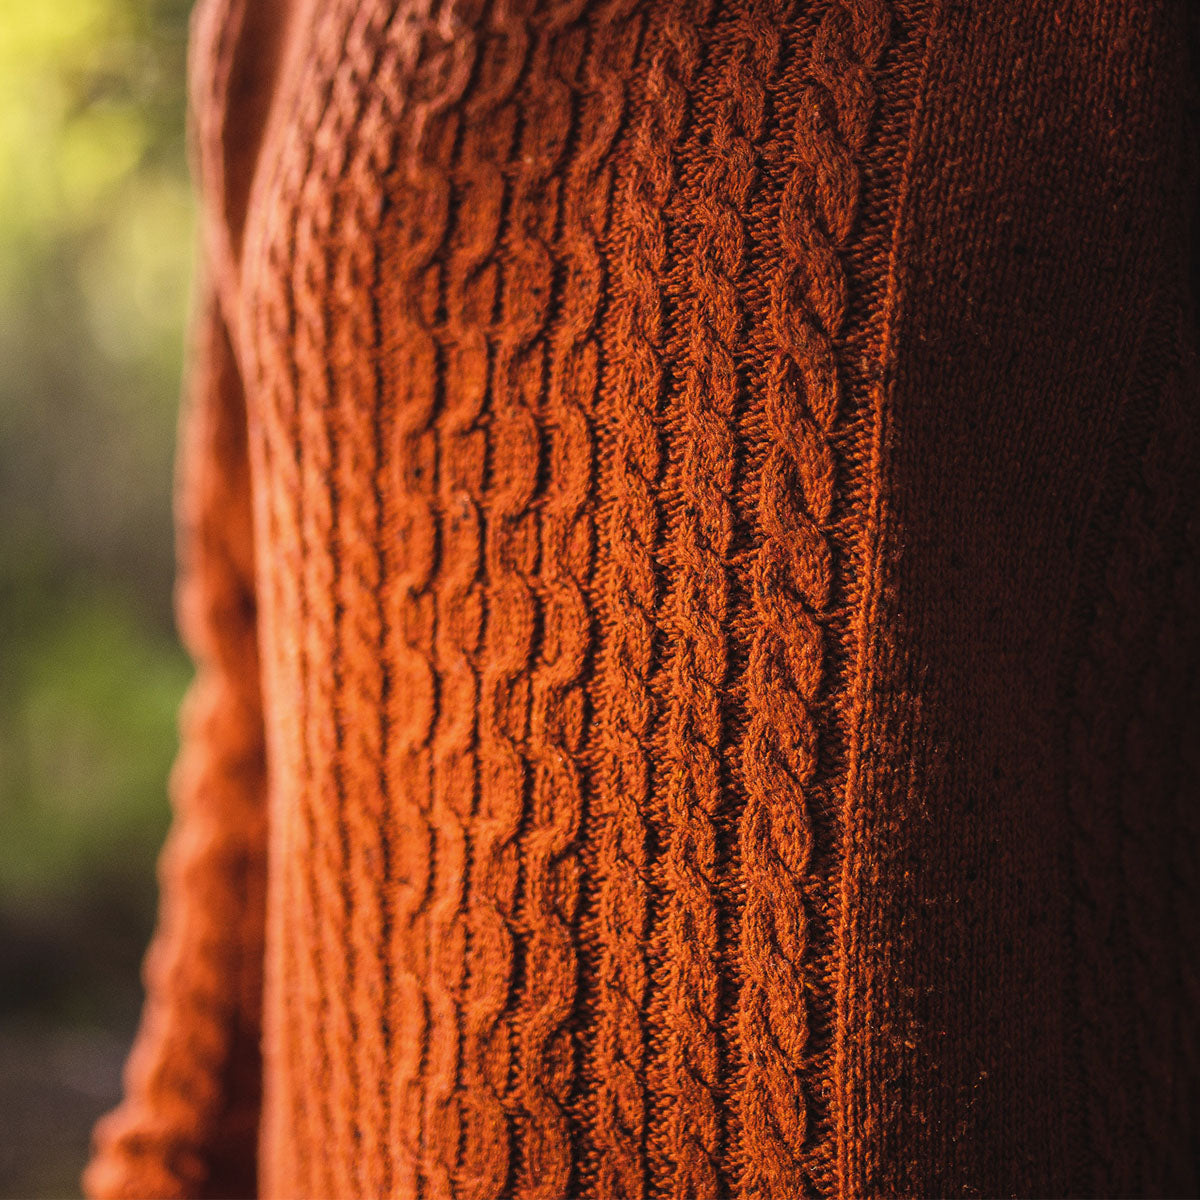 Drifter Knitted Jumper - Picante Orange